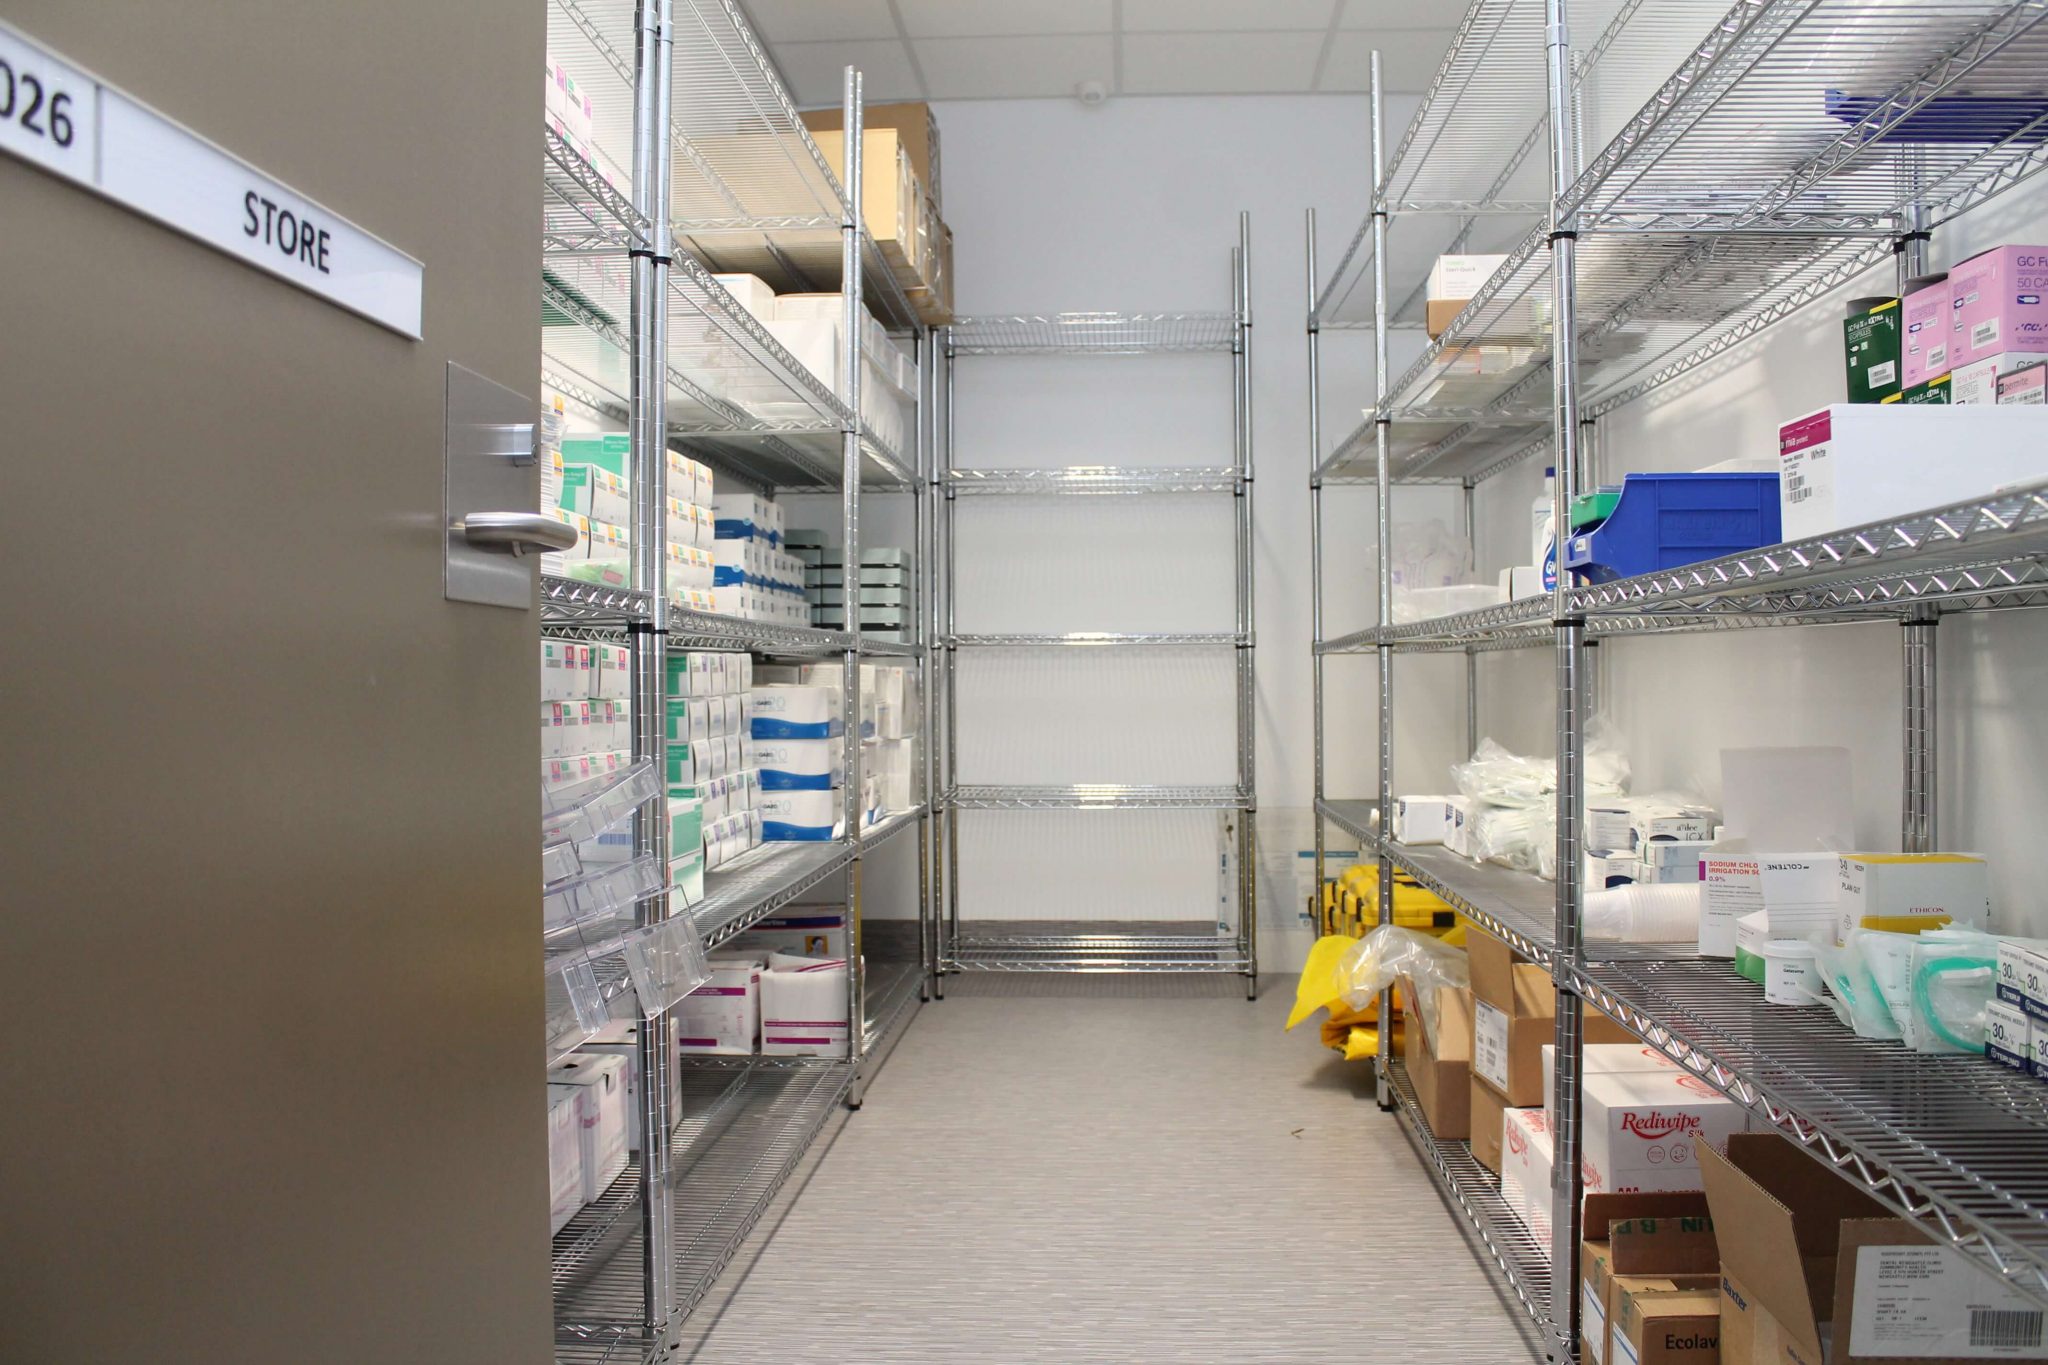 Medical Storage Systems